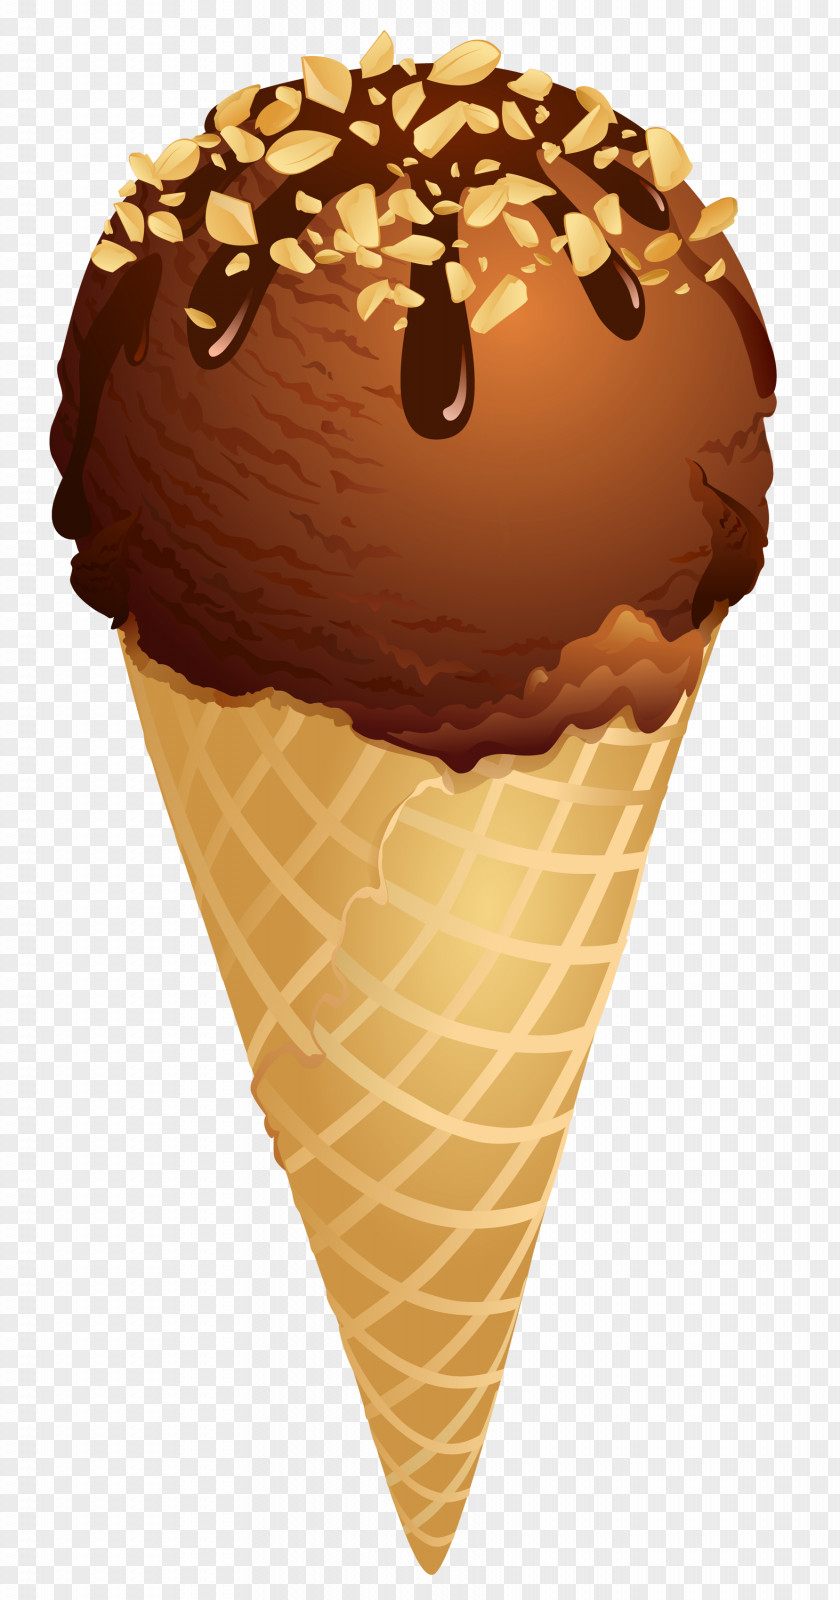 Chocolate Ice Cream Cone Clipart Picture Clip Art PNG